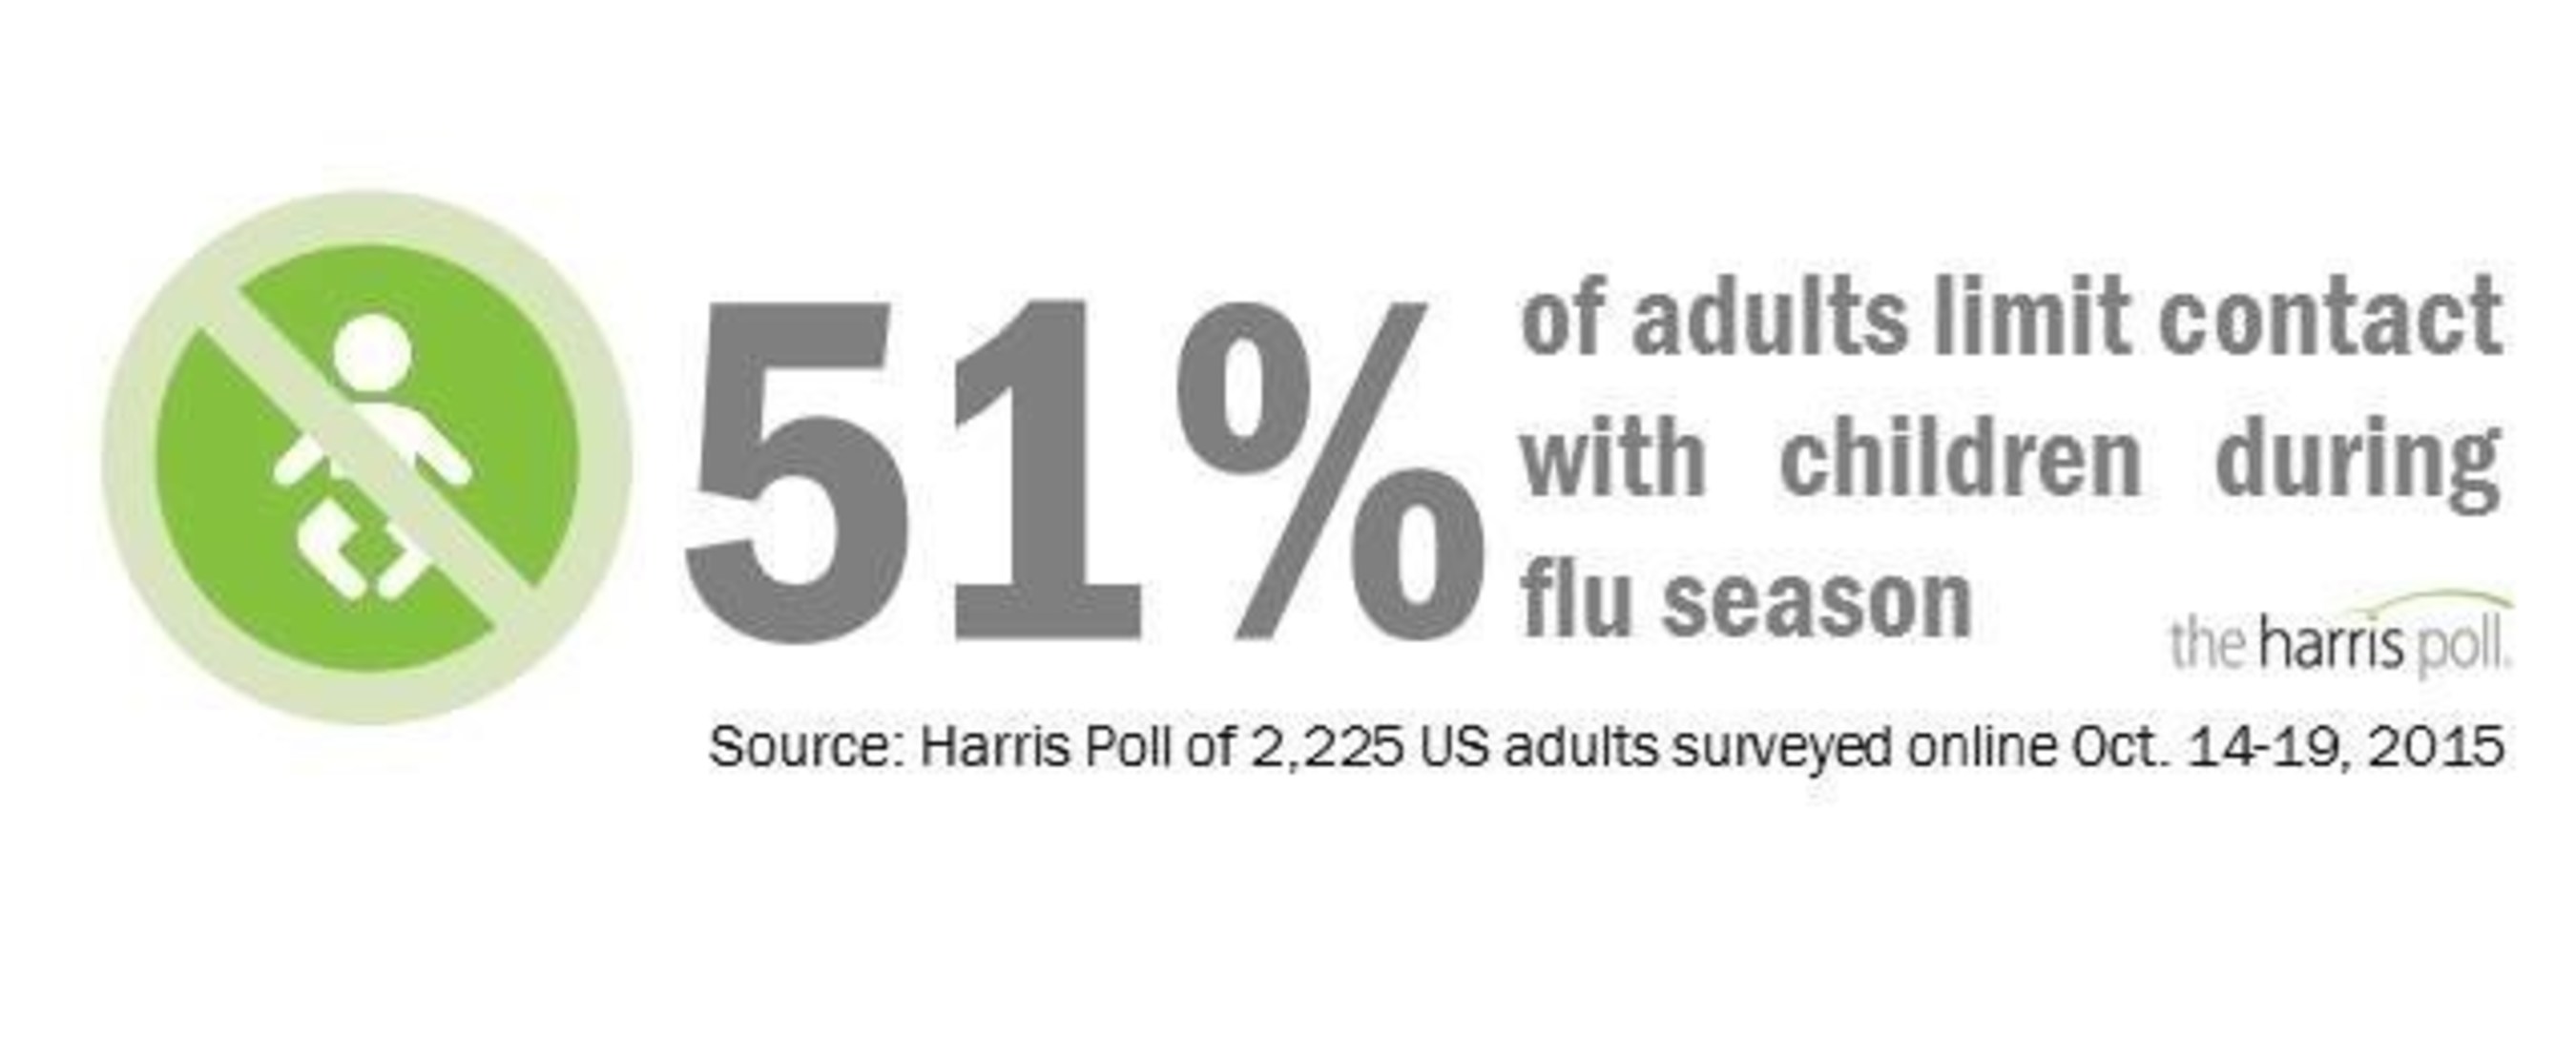 Avoiding contact with kids is just one of the ways Americans try to get through flu season unscathed.